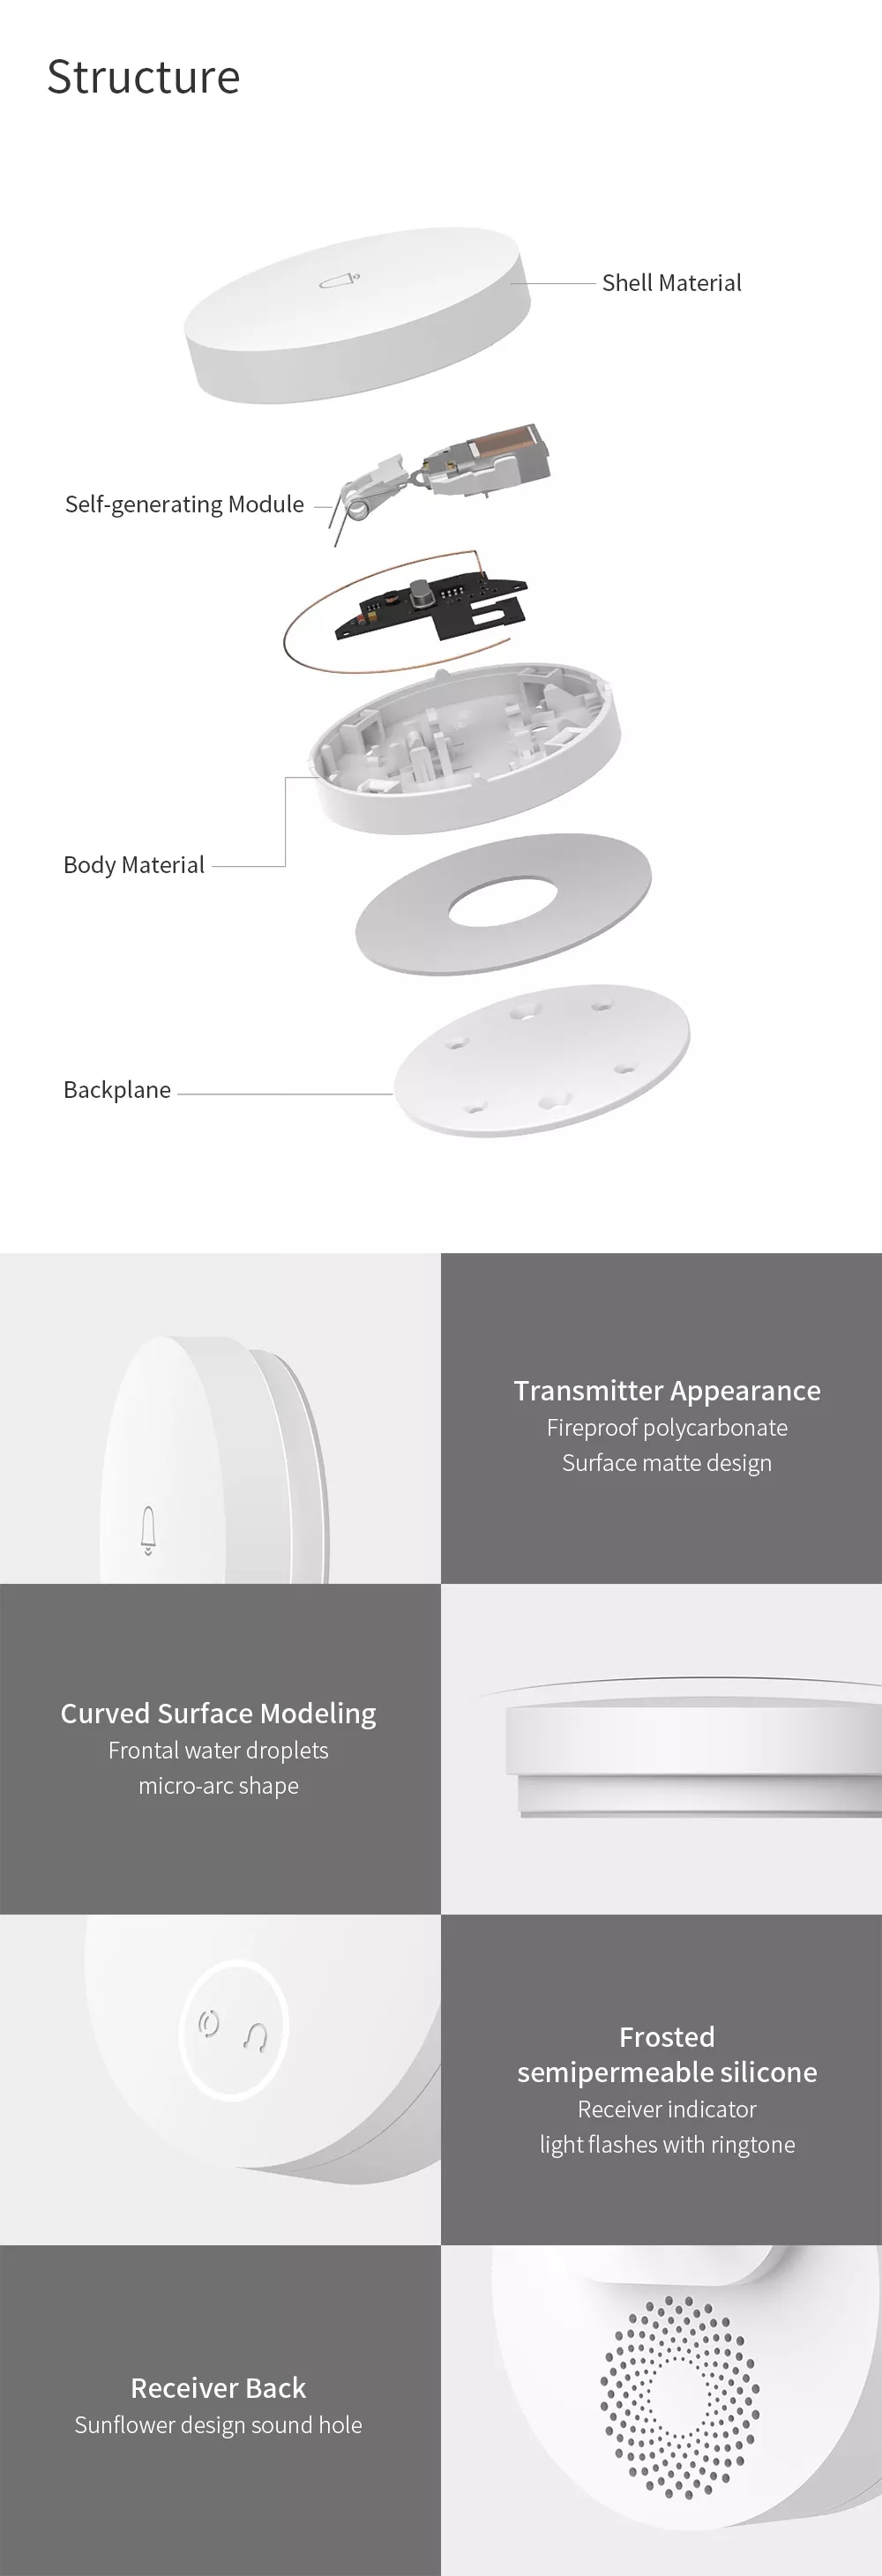 Original Linptech Self-power Wireless Doorbell WIFI Remote Setting From Eco-system 11